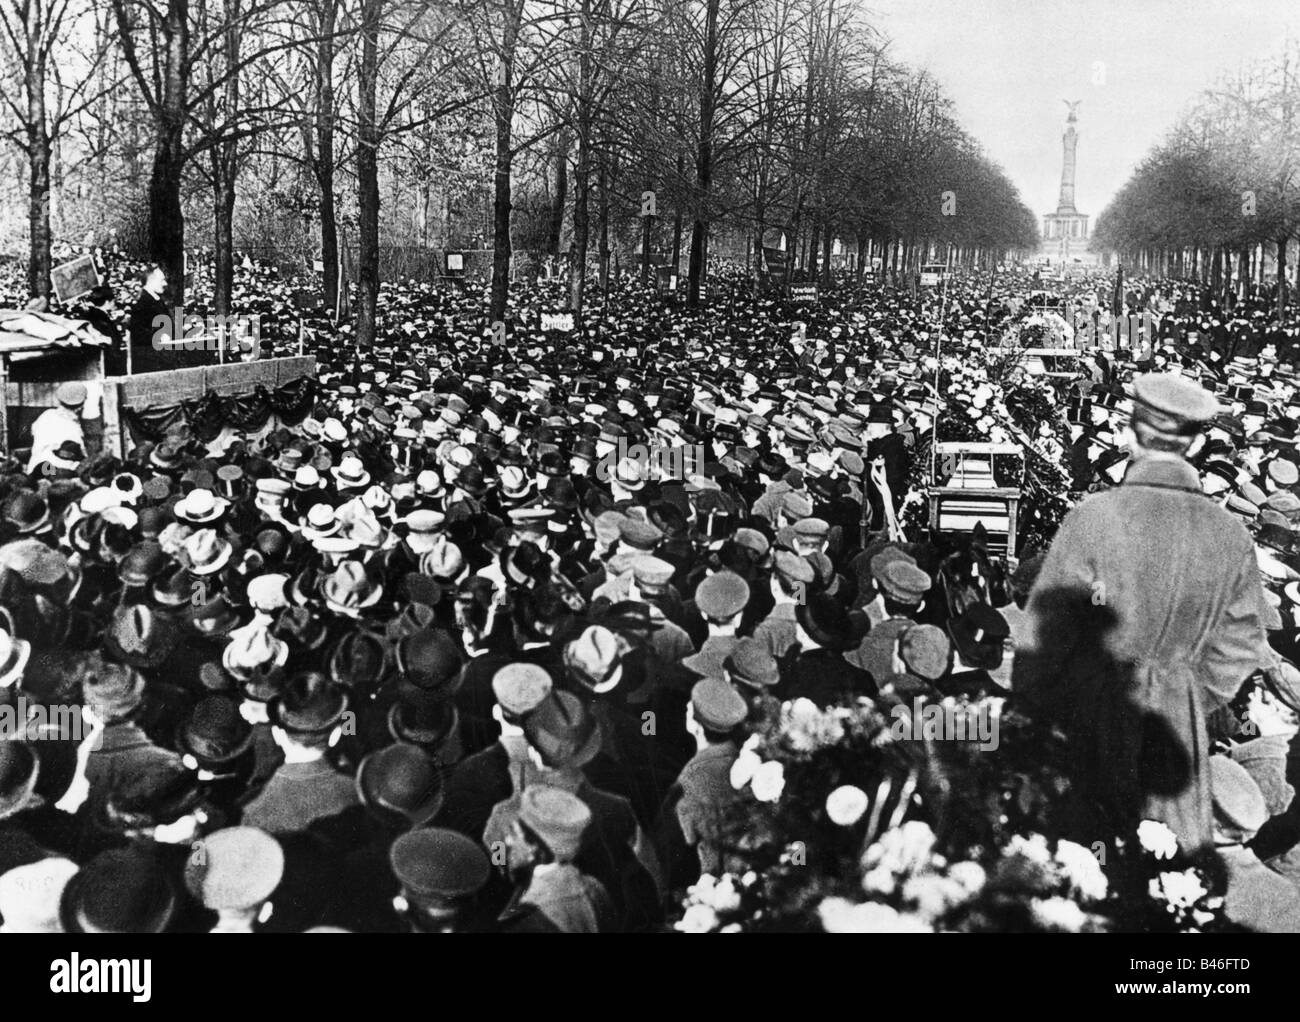 geography / travel, Germany, politic, demonstrations, protest manisfestation against the attempted counter-revolutionary coup from 6.12.1918, funeral of the victims, Berlin, 21.12.1918, demonstration, communists, Spartakus, politics, Germany, 20th century, historic, historical, people, 1910s, Stock Photo